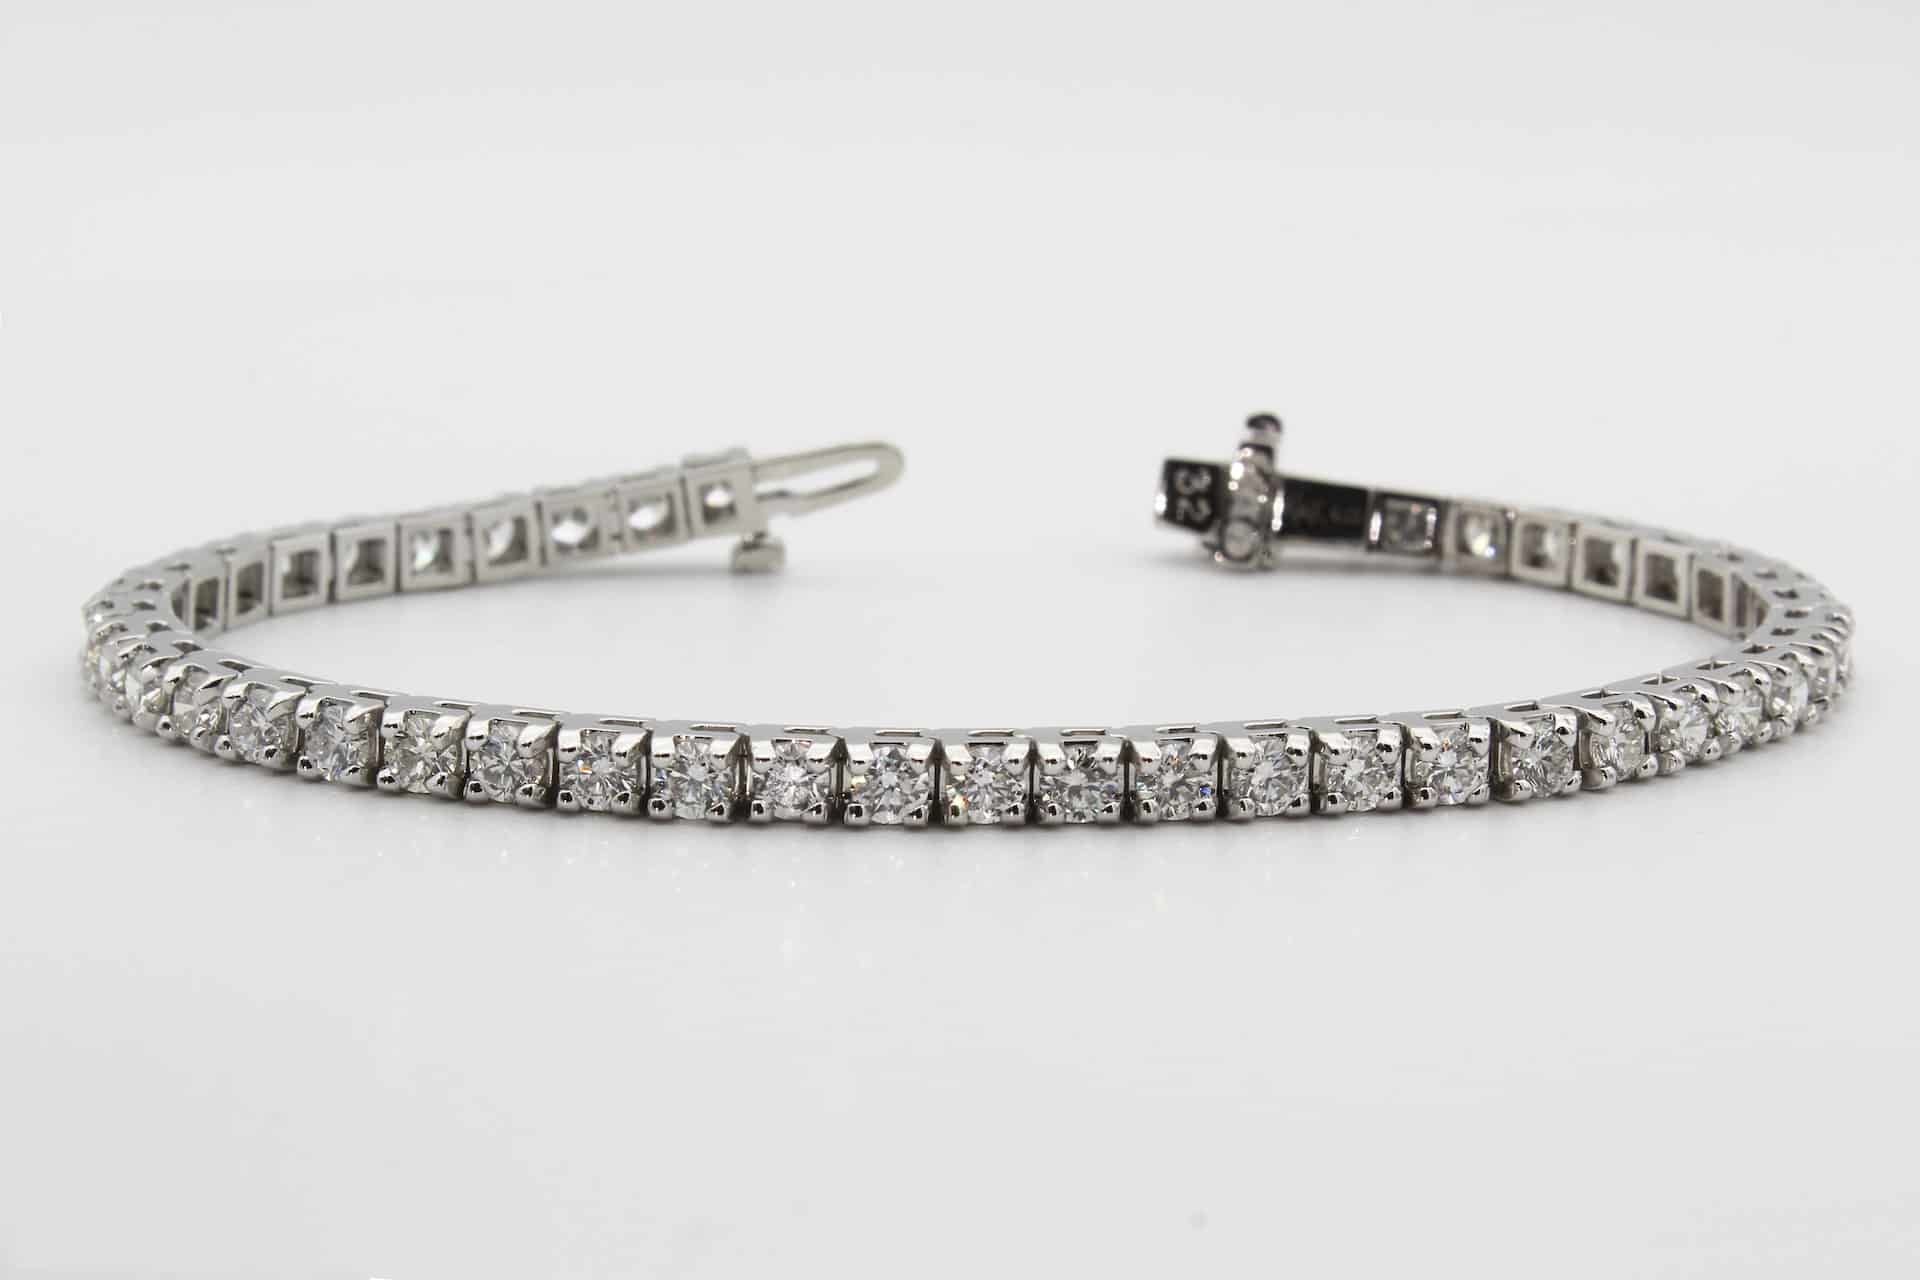 White Diamond Tennis Bracelet Seven Inches Long with Safety Clasp ⋆ Laurie  Sarah